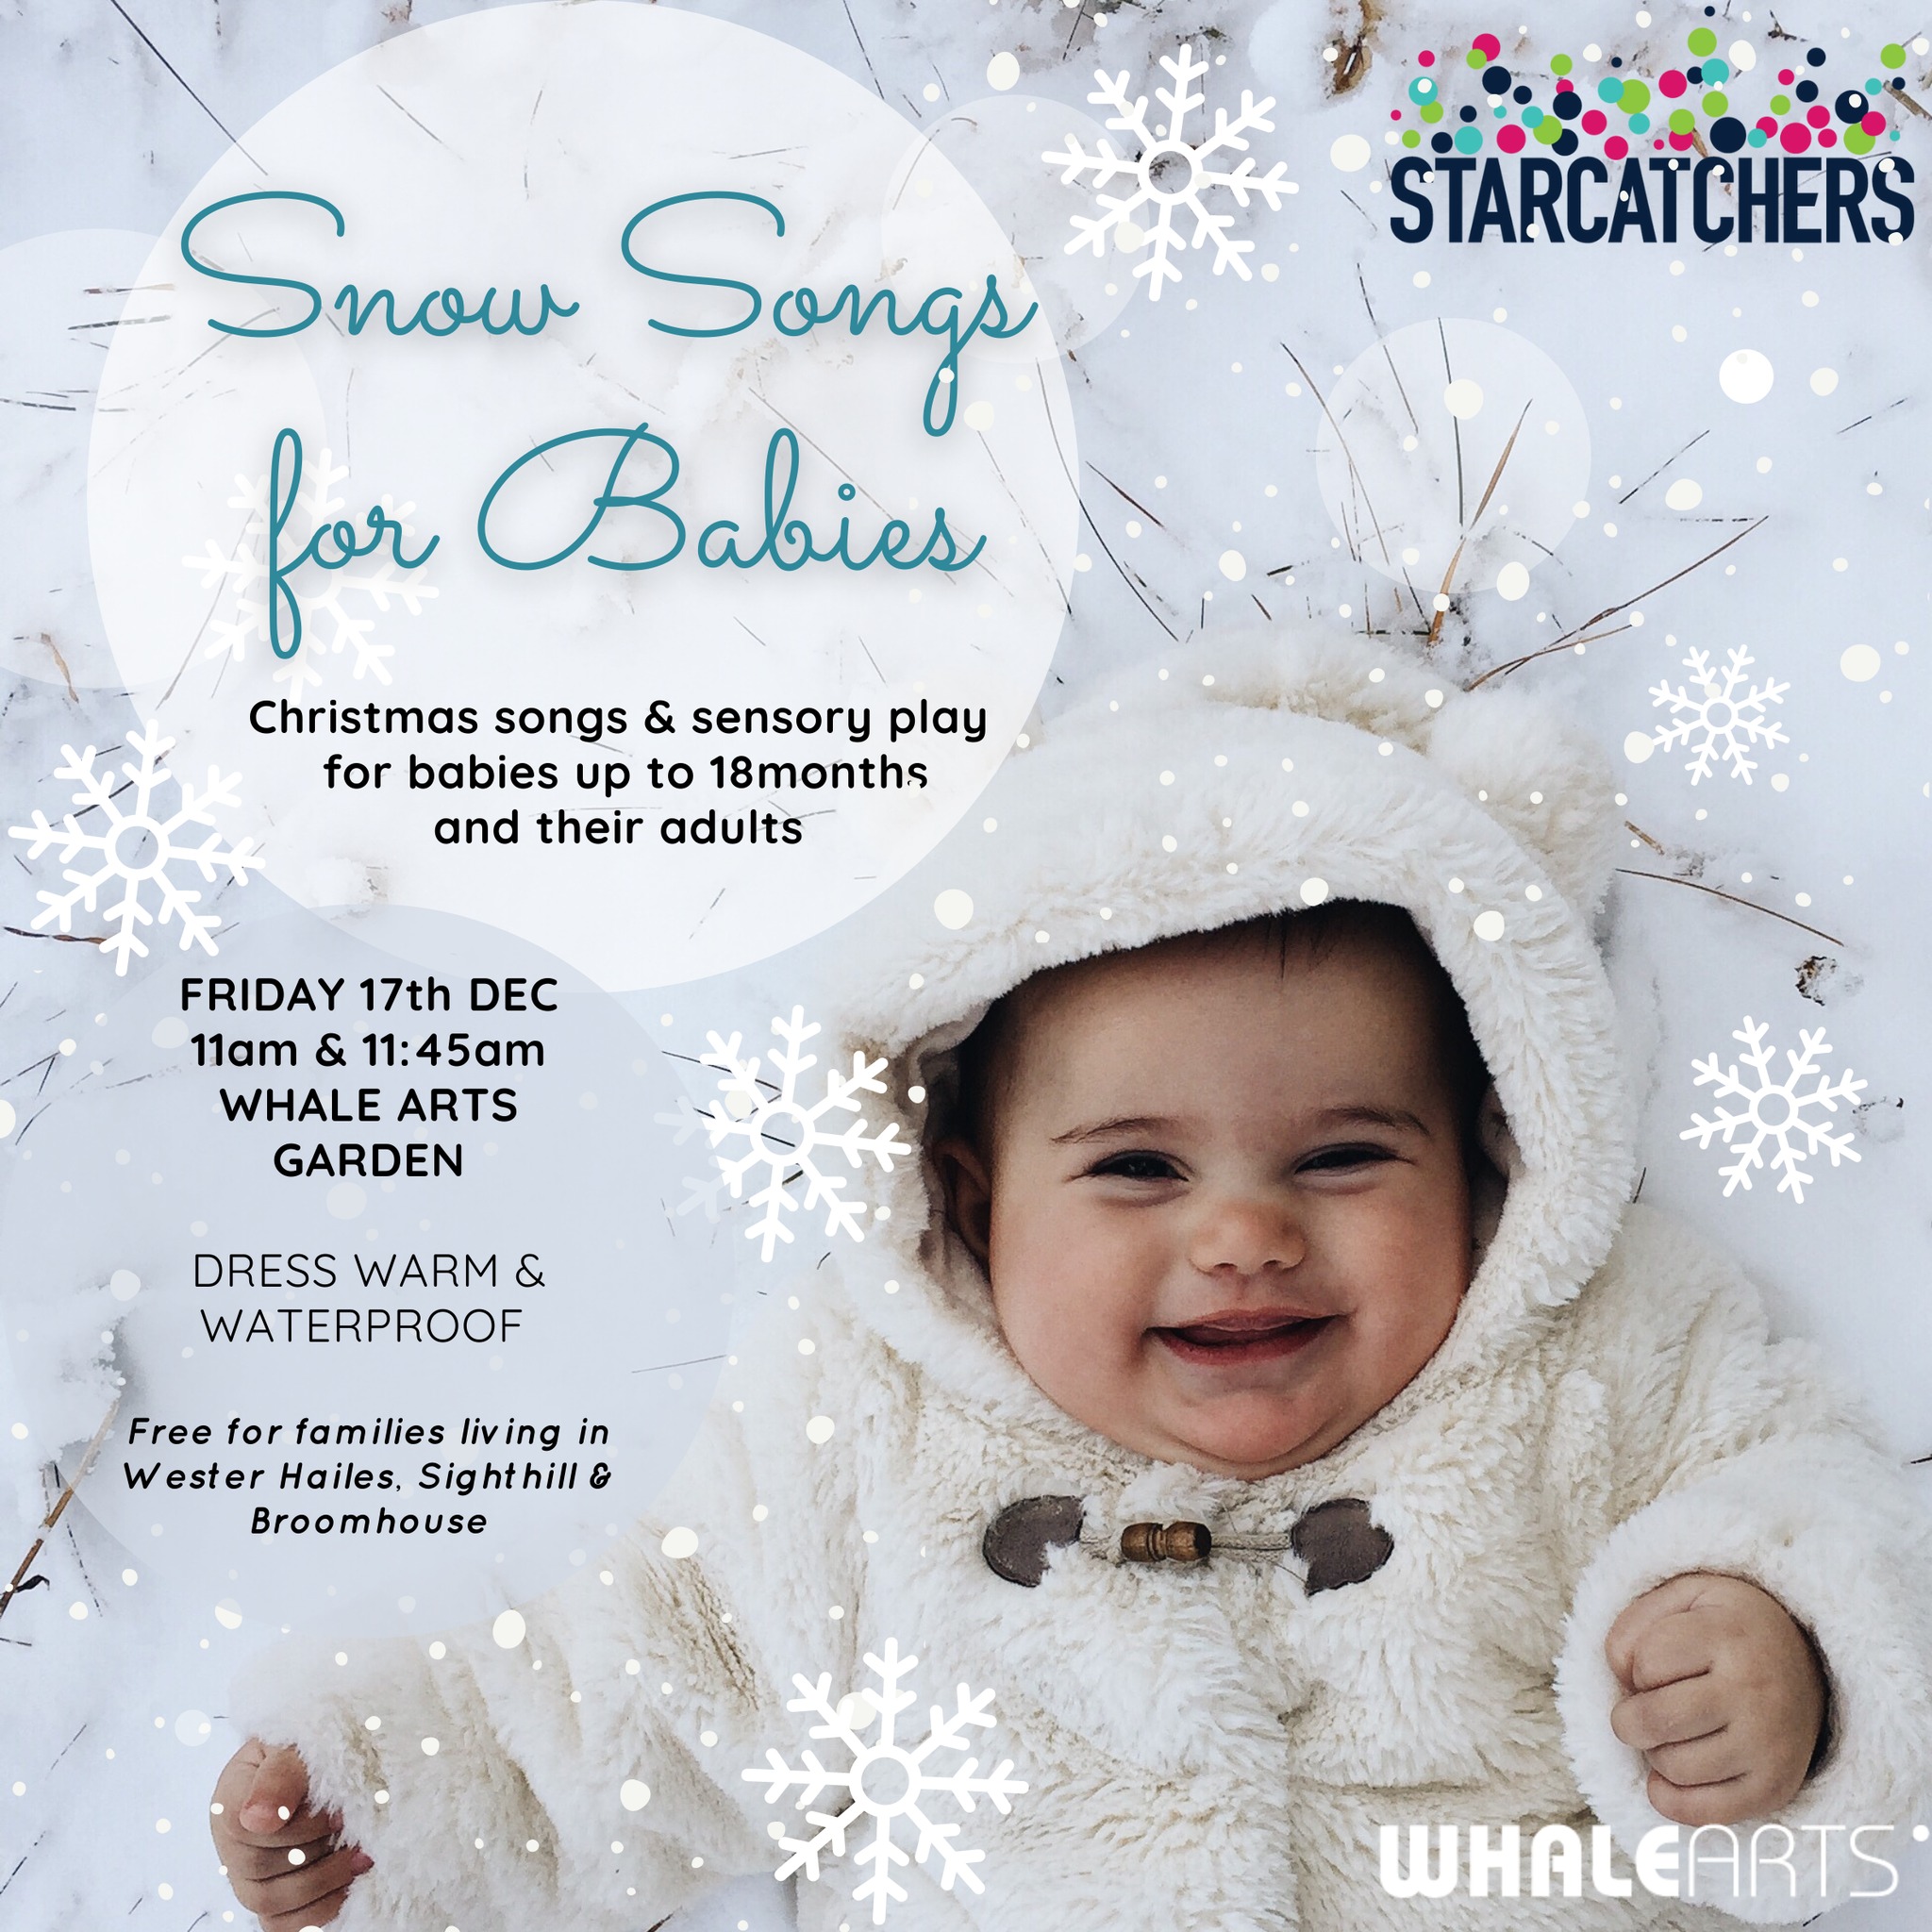 Snow Babies Starcatchers what's on FEatured Image Digital Sentinel